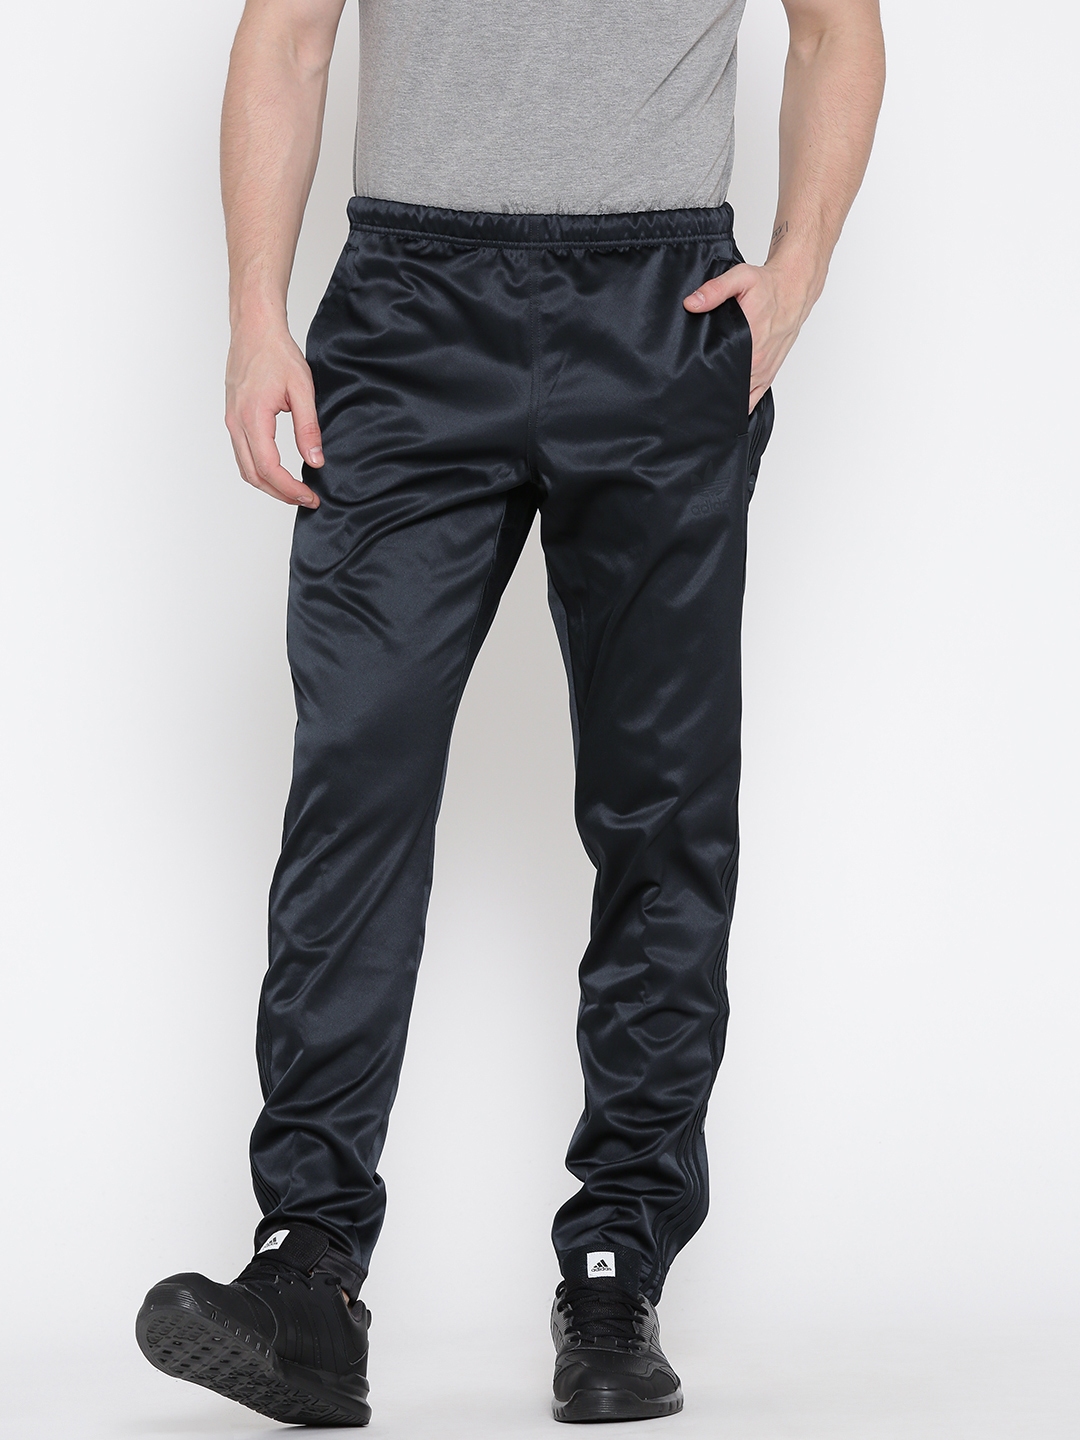 adidas track pants with buttons